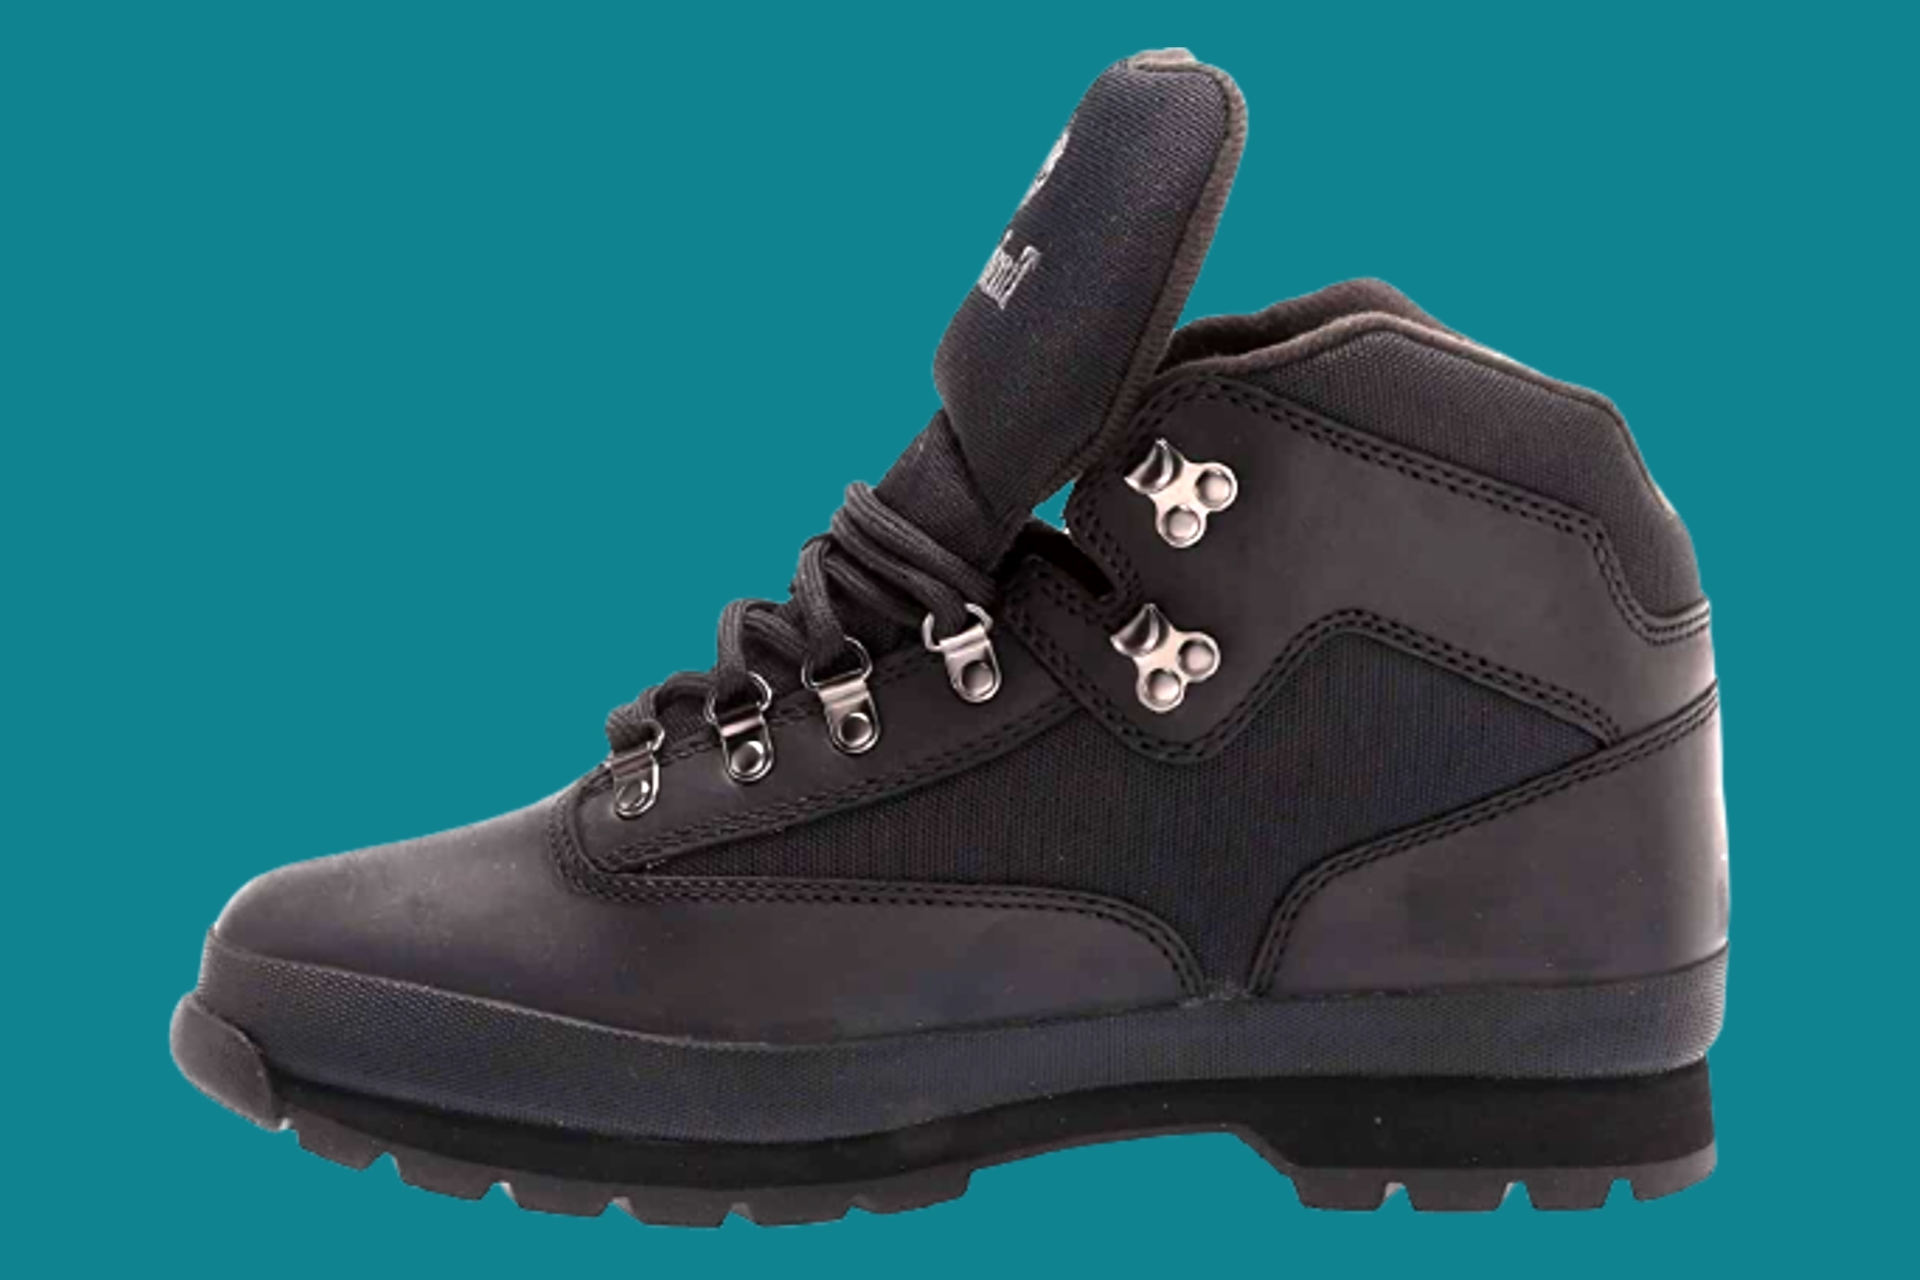 Best hiking boots by Timberland